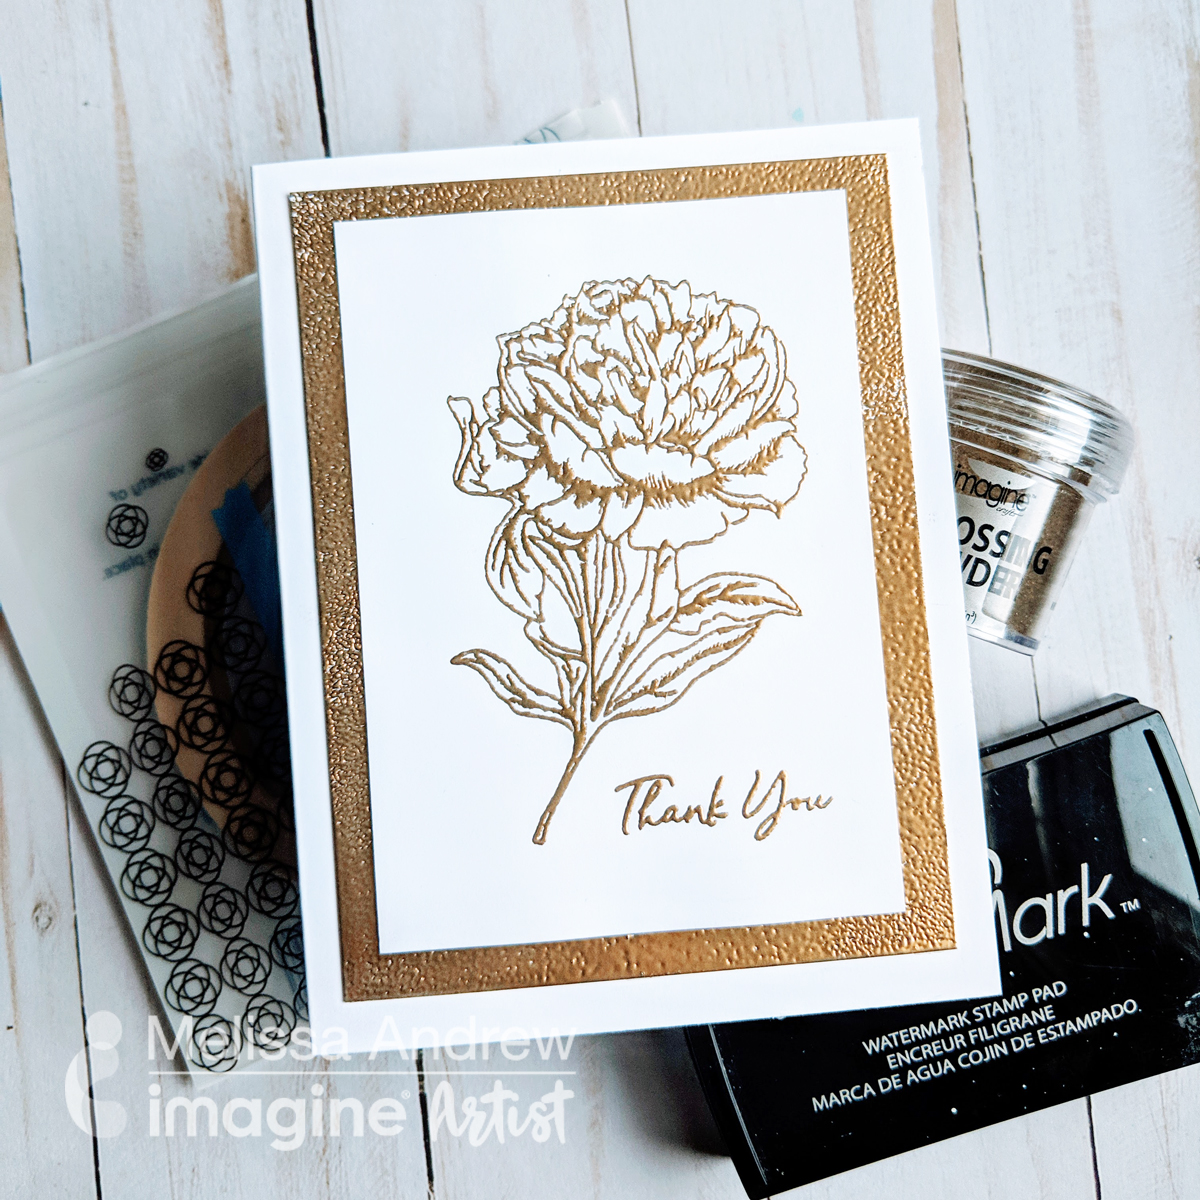 Handmade wedding thank you note featuring gold embossing.